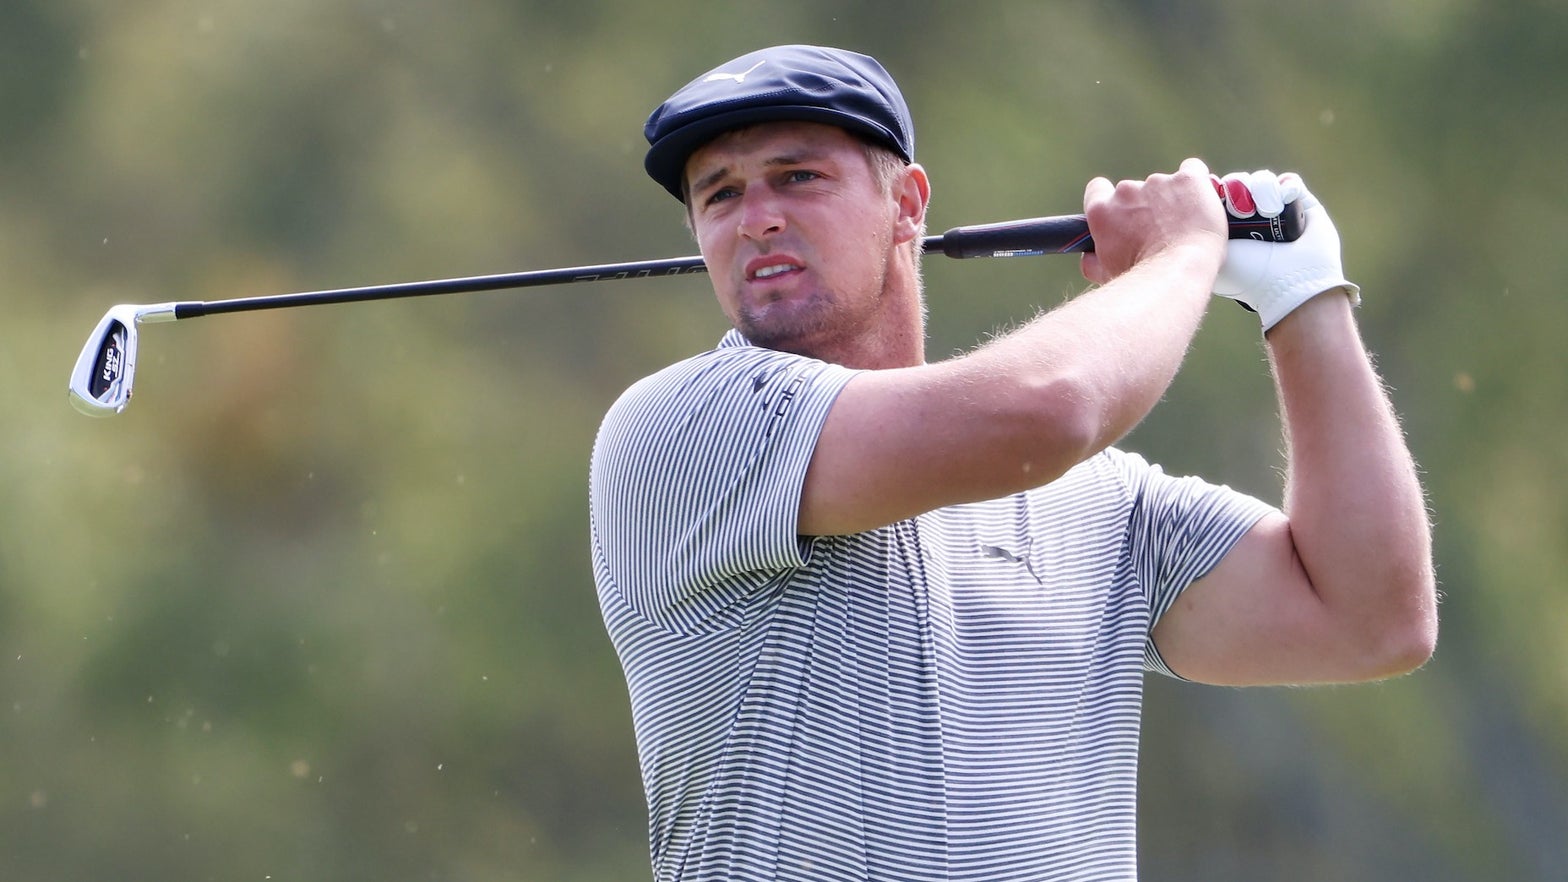 How the average golfer can benefit from Bryson DeChambeau's long irons